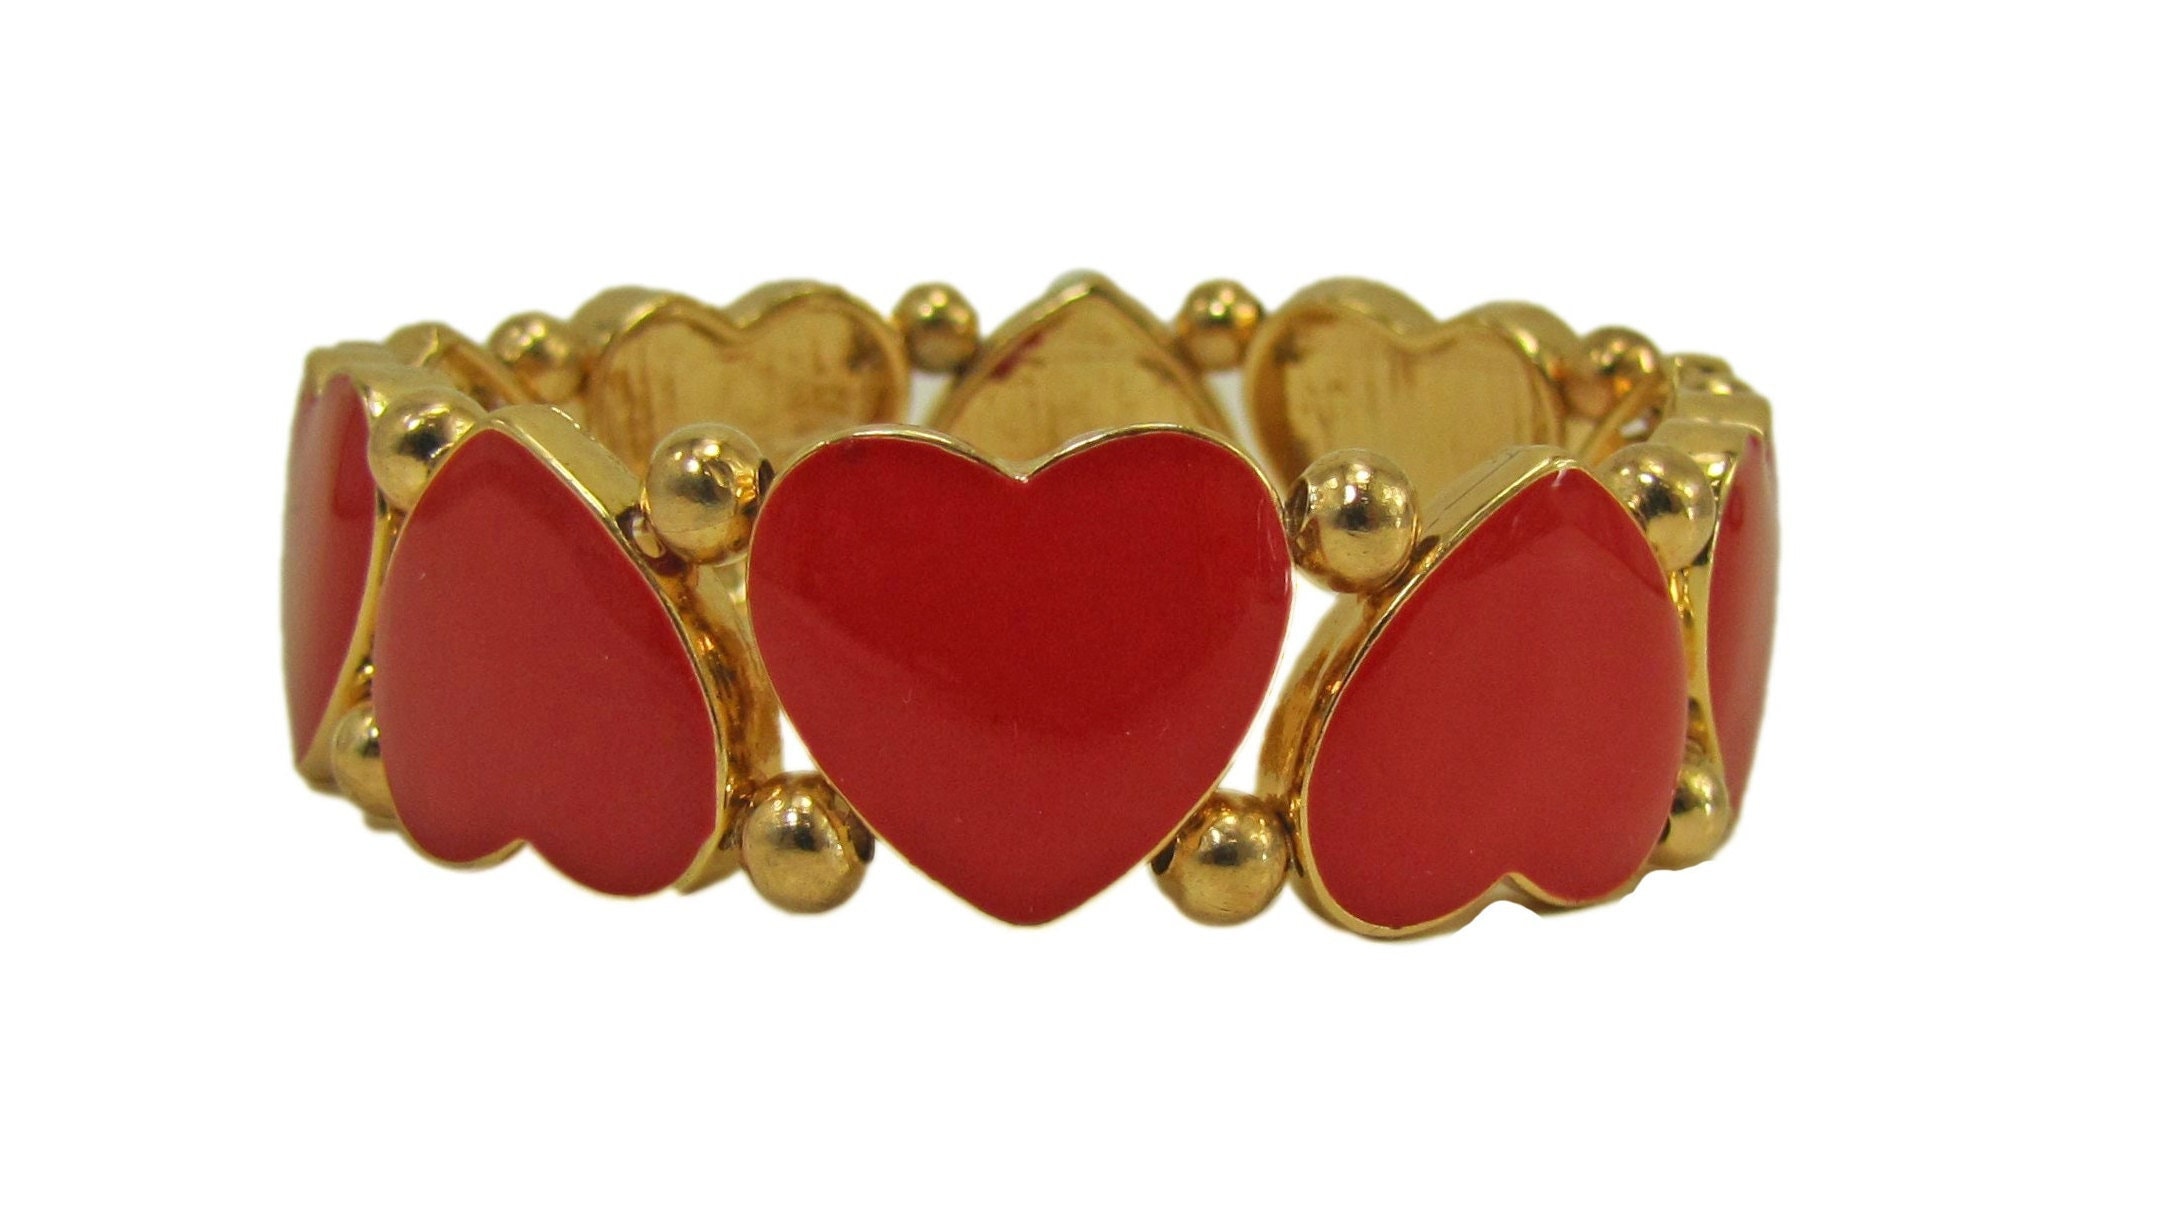 Gold Trimmed Gorgeous Heart Beads, Beautiful Metal Beads for